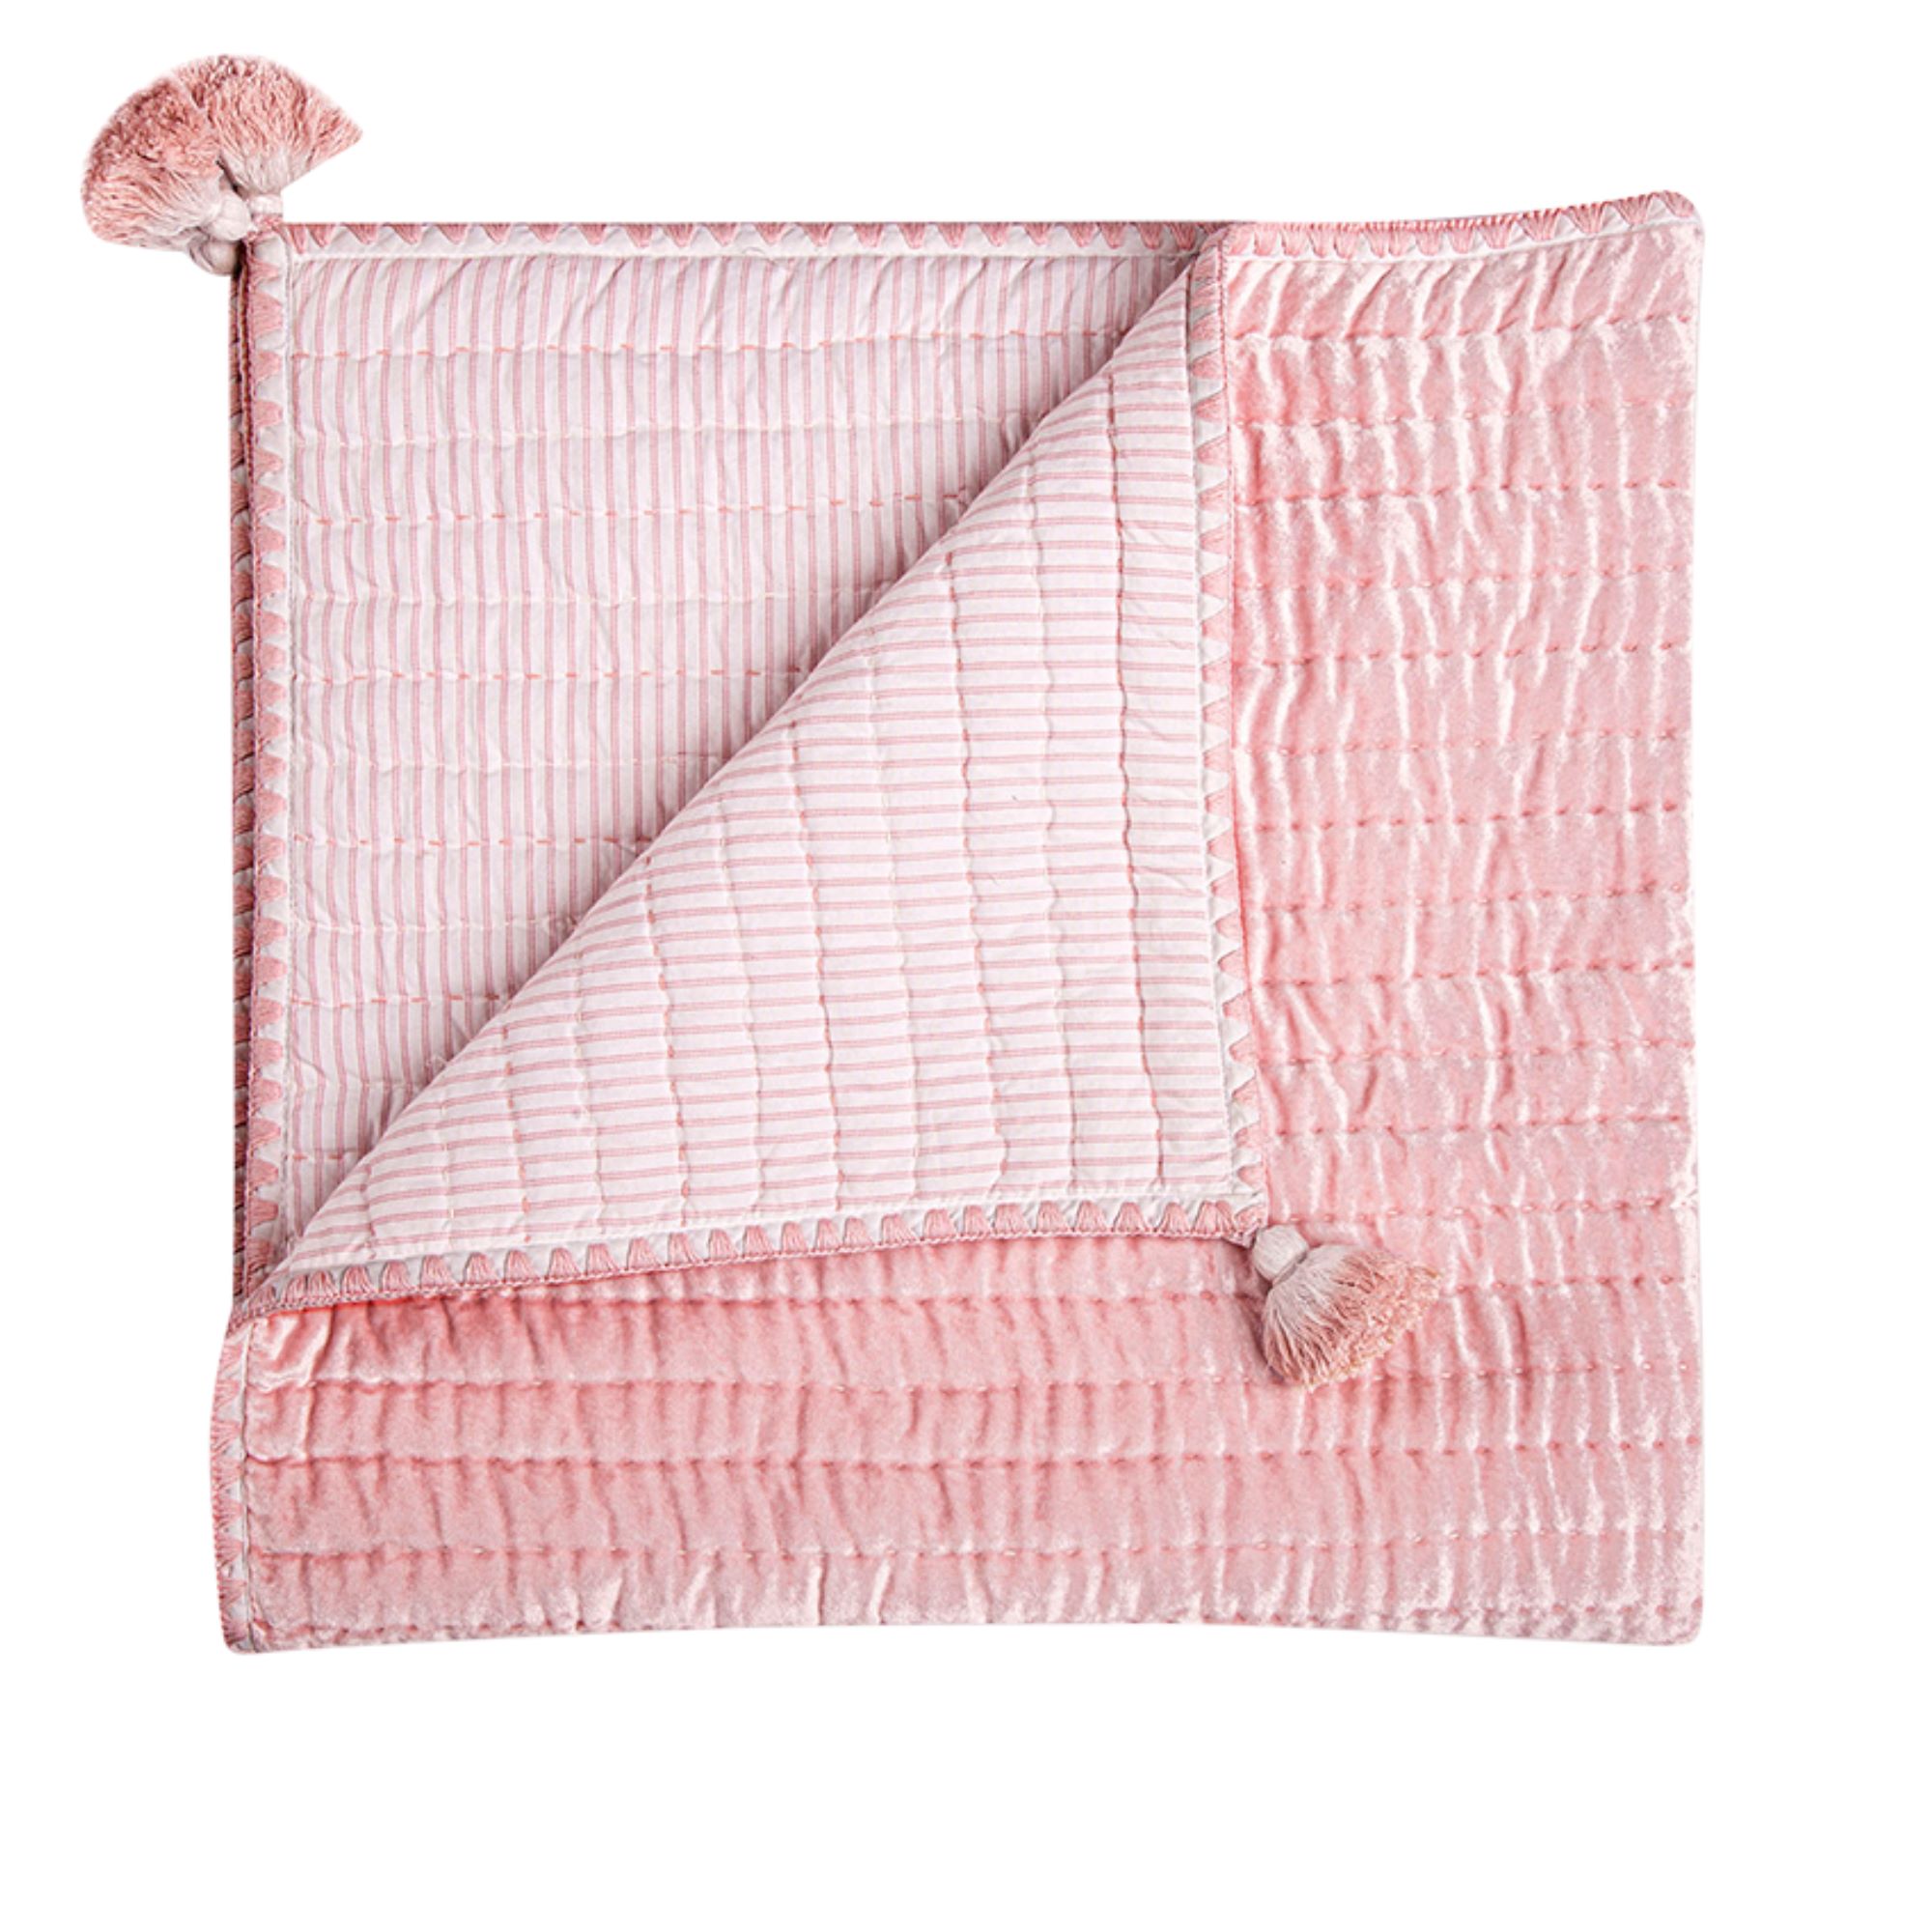 Pink quilted blanket on white background